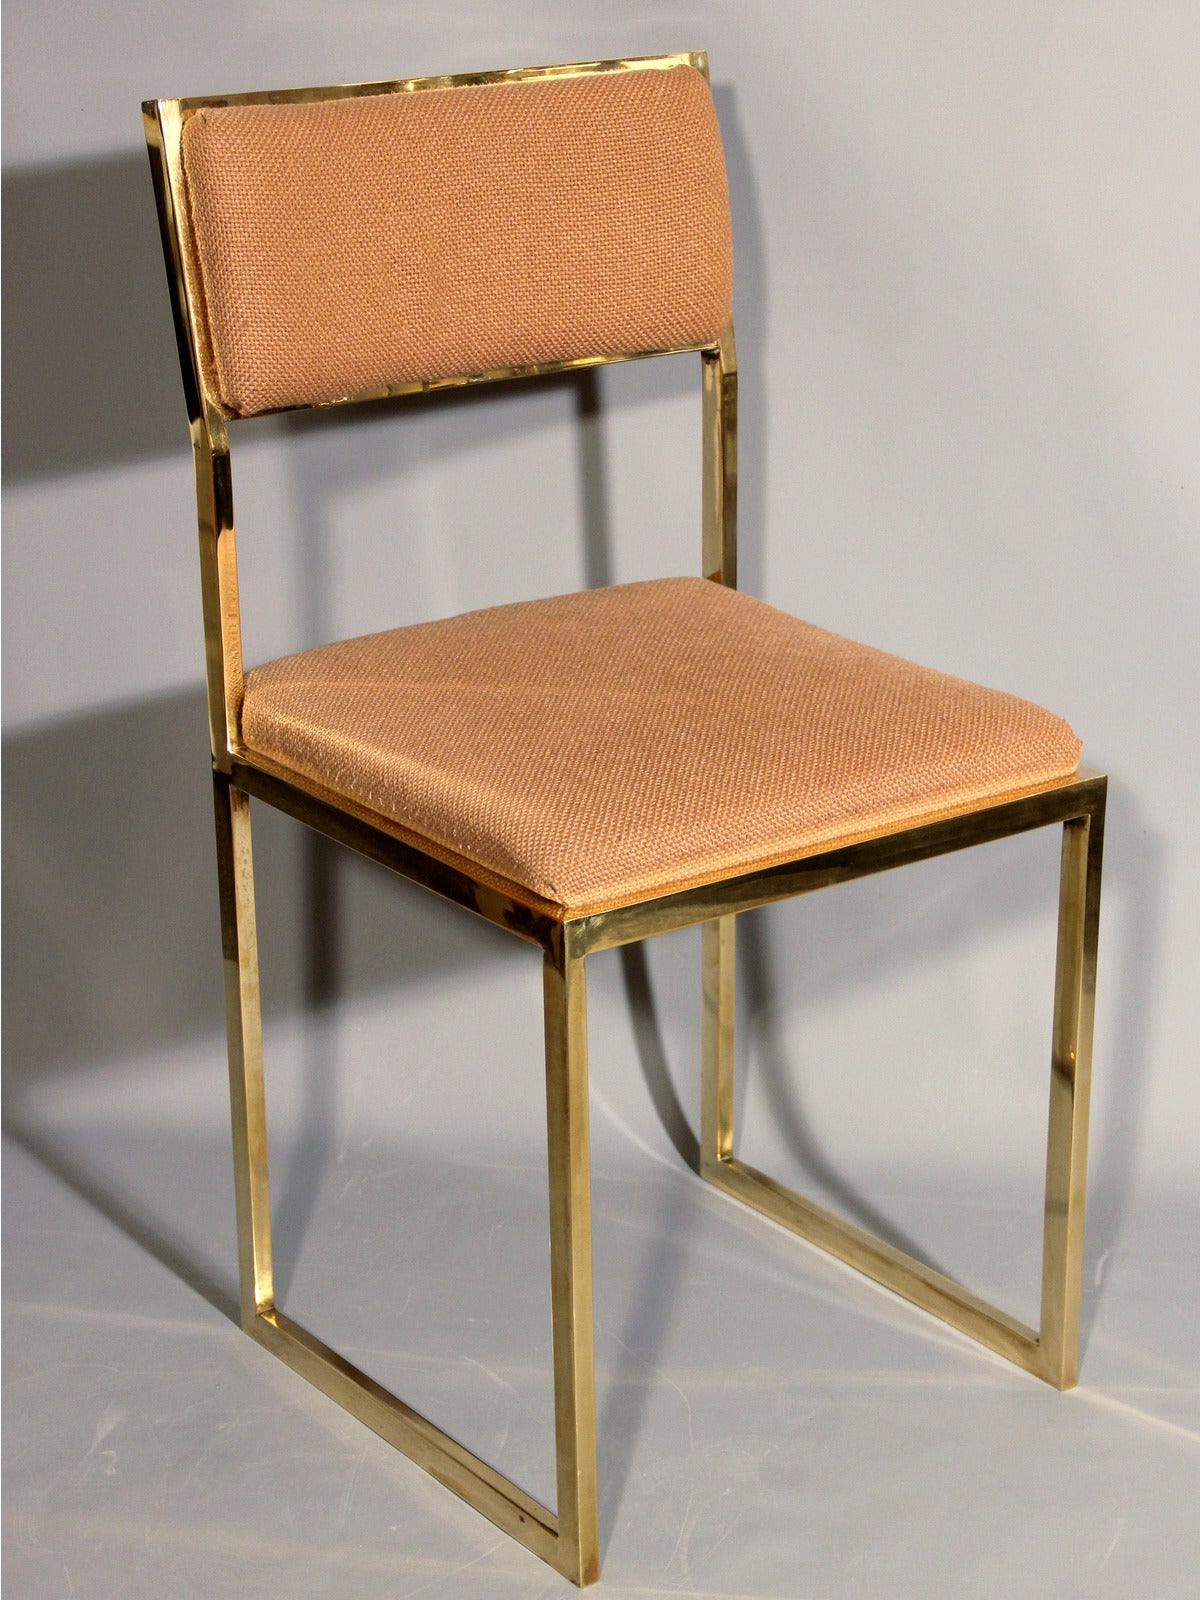 Eight elegant 1970s chairs in polished brass. Original upholstery (to be redone).